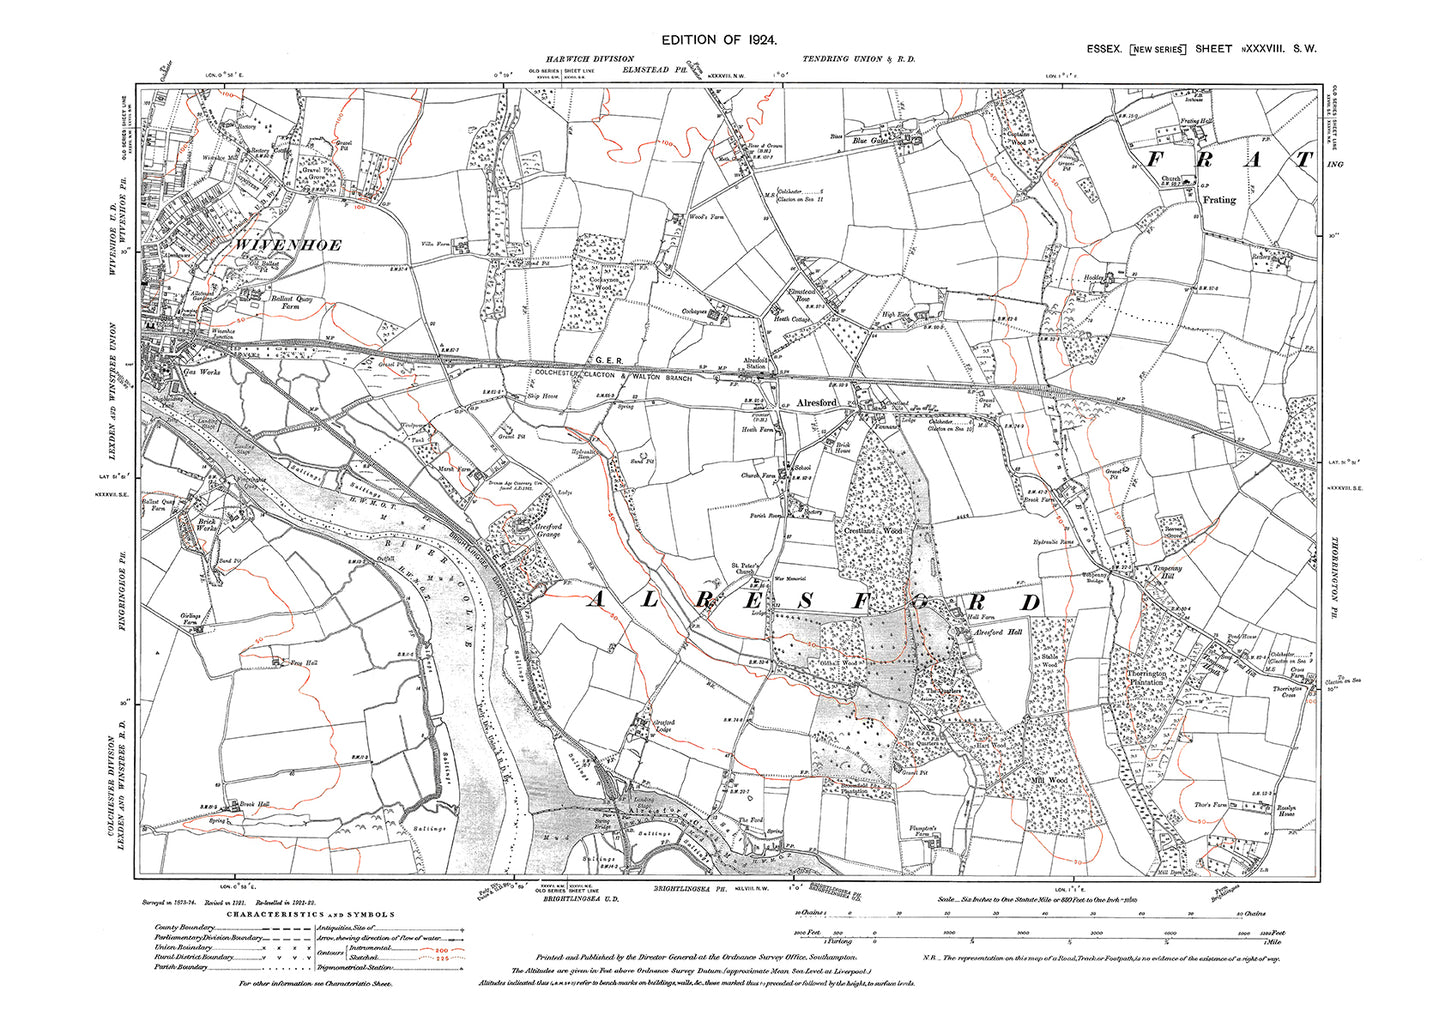 Old OS map dated 1924, showing Wivenhoe (east), Alresford and Frating in Essex - 38SW